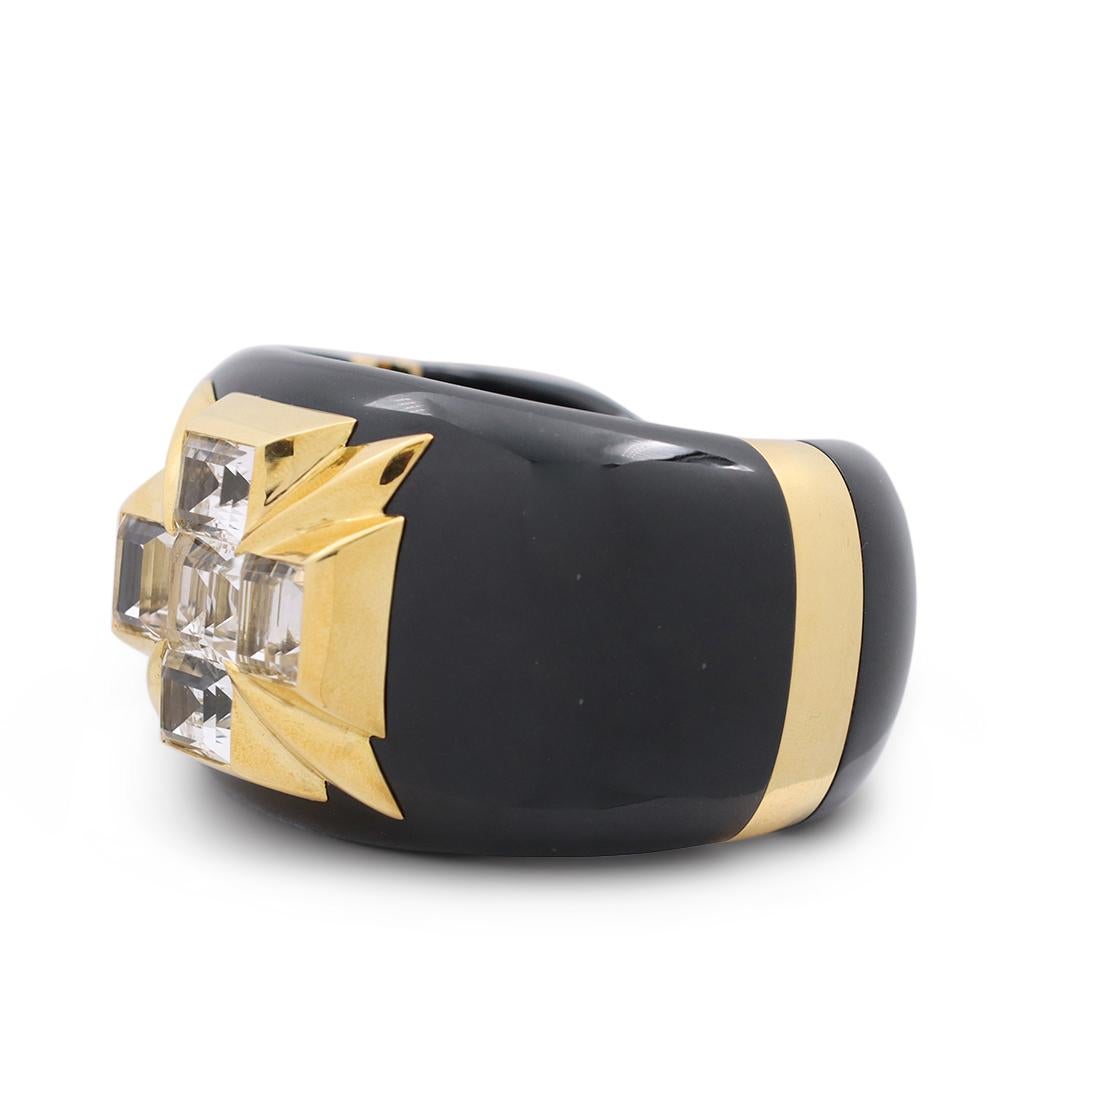 Authentic Verdura Maltese Cross Cuff crafted in black jade. The iconic maltese cross motif is set with five emerald cut white topaz stones mounted in 18 karat yellow gold. The hinged cuff bracelet measures 1.70 inches wide and will fit up to a 6 1/4